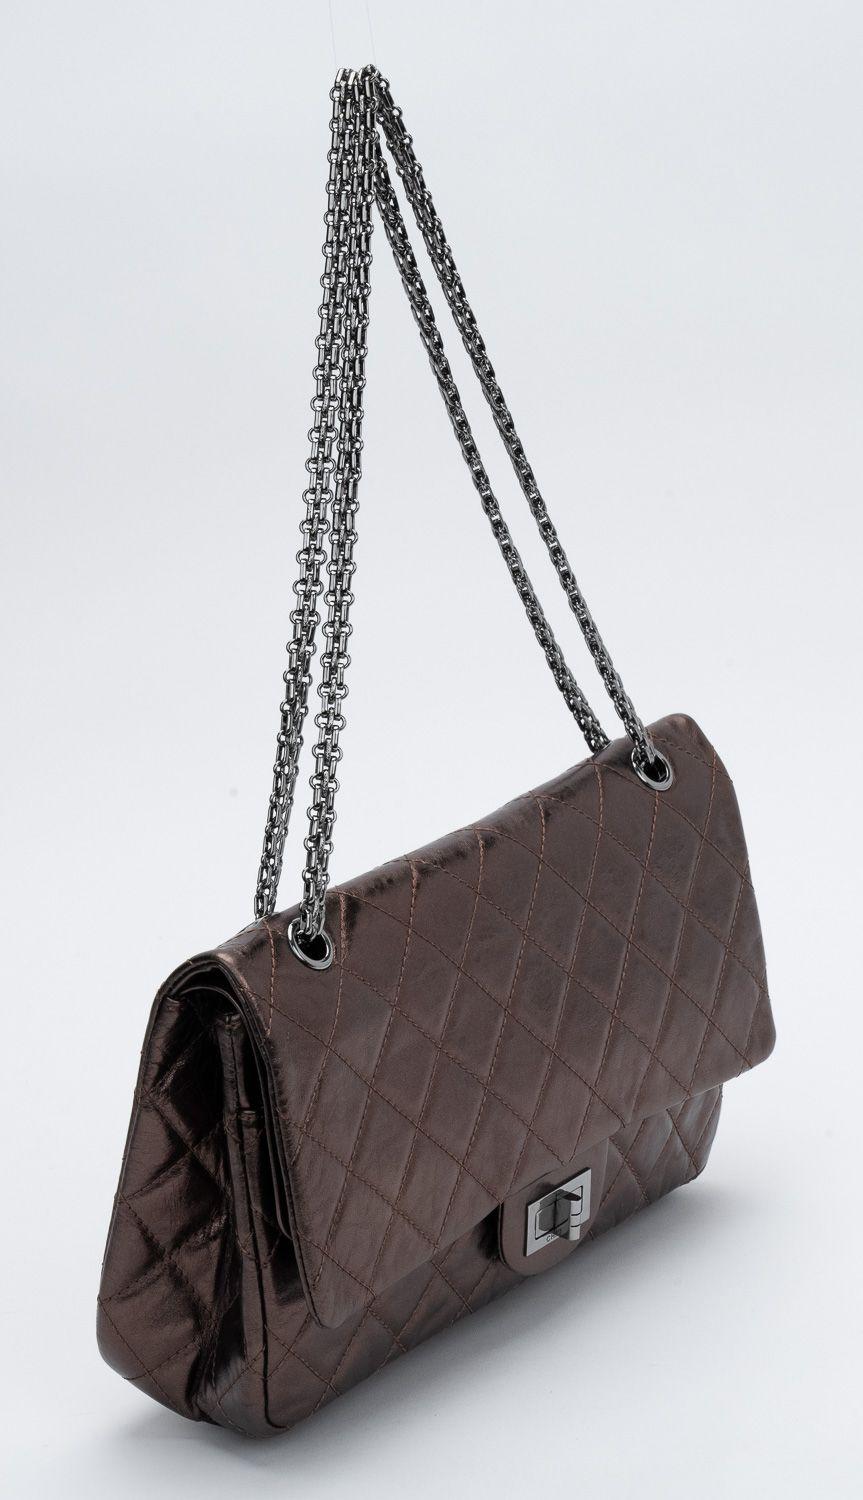 Chanel bronze reissue distressed leather jumbo double-flap bag with ruthenium hardware. Collection 12. Comes with hologram and original dust cover.